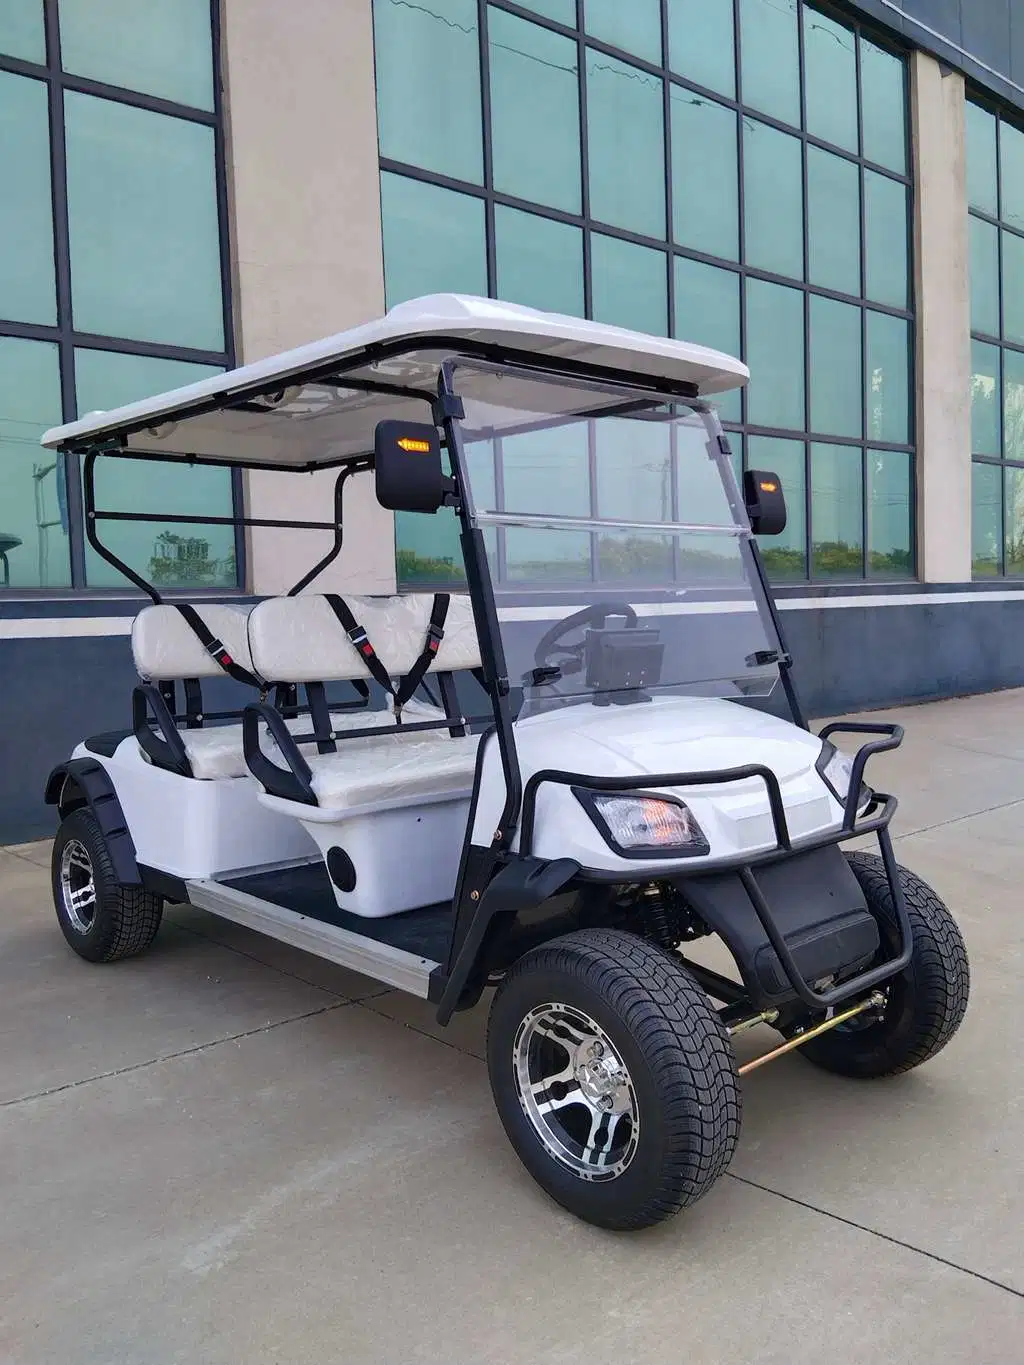 Mini High Chassis Golf Carts 4seat Manufacture with Storage Space at Back Cheap Price High Quality Golf Cart for Sale